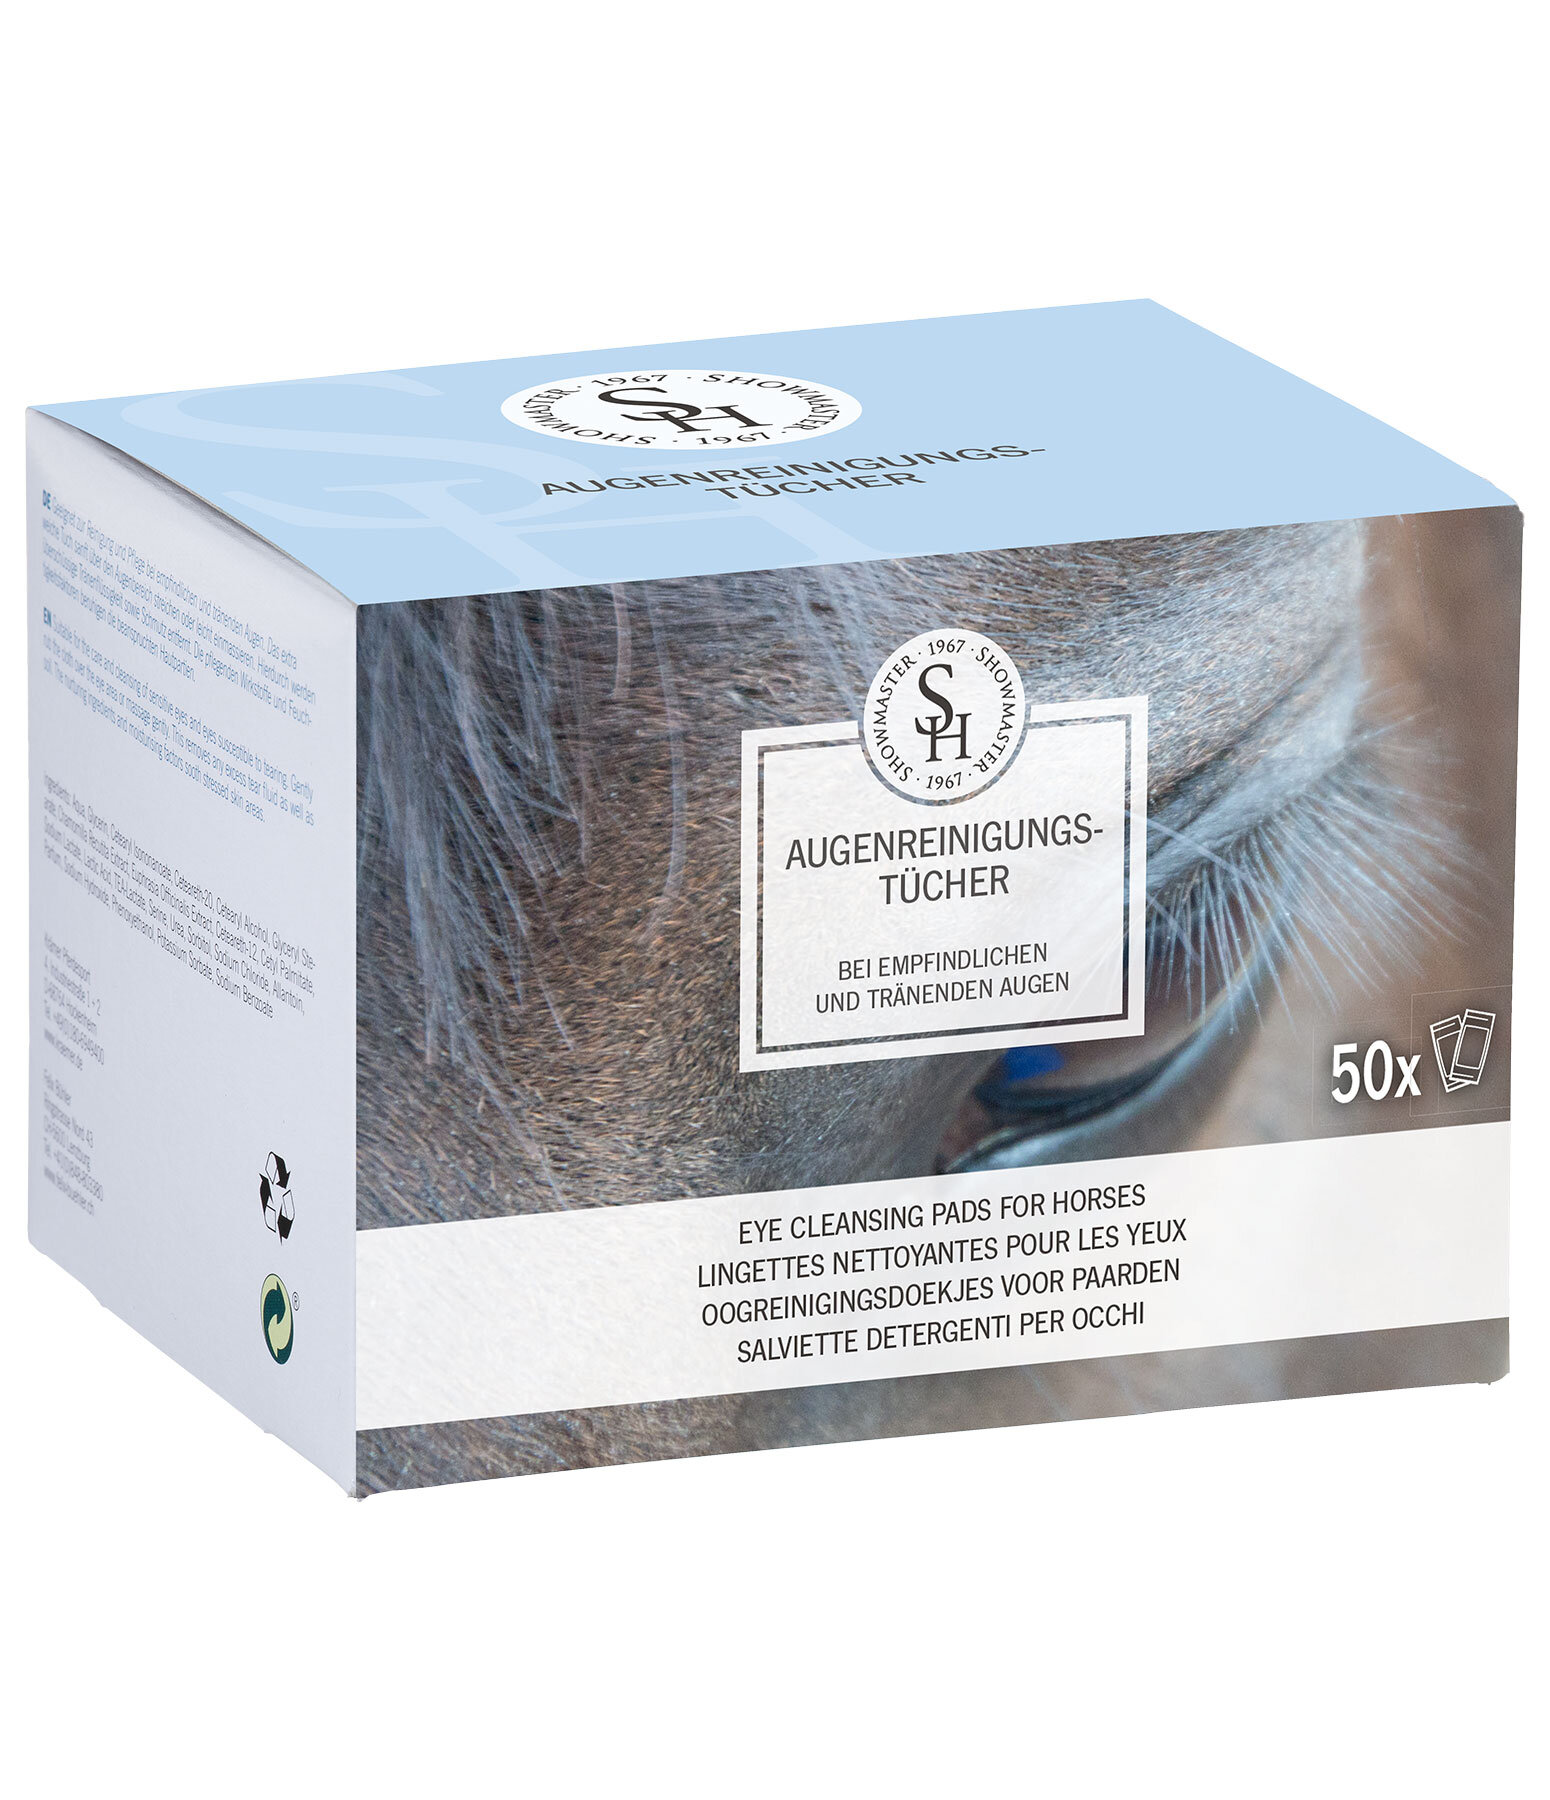 Eye Cleansing Wipes for Horses - 50 wipes